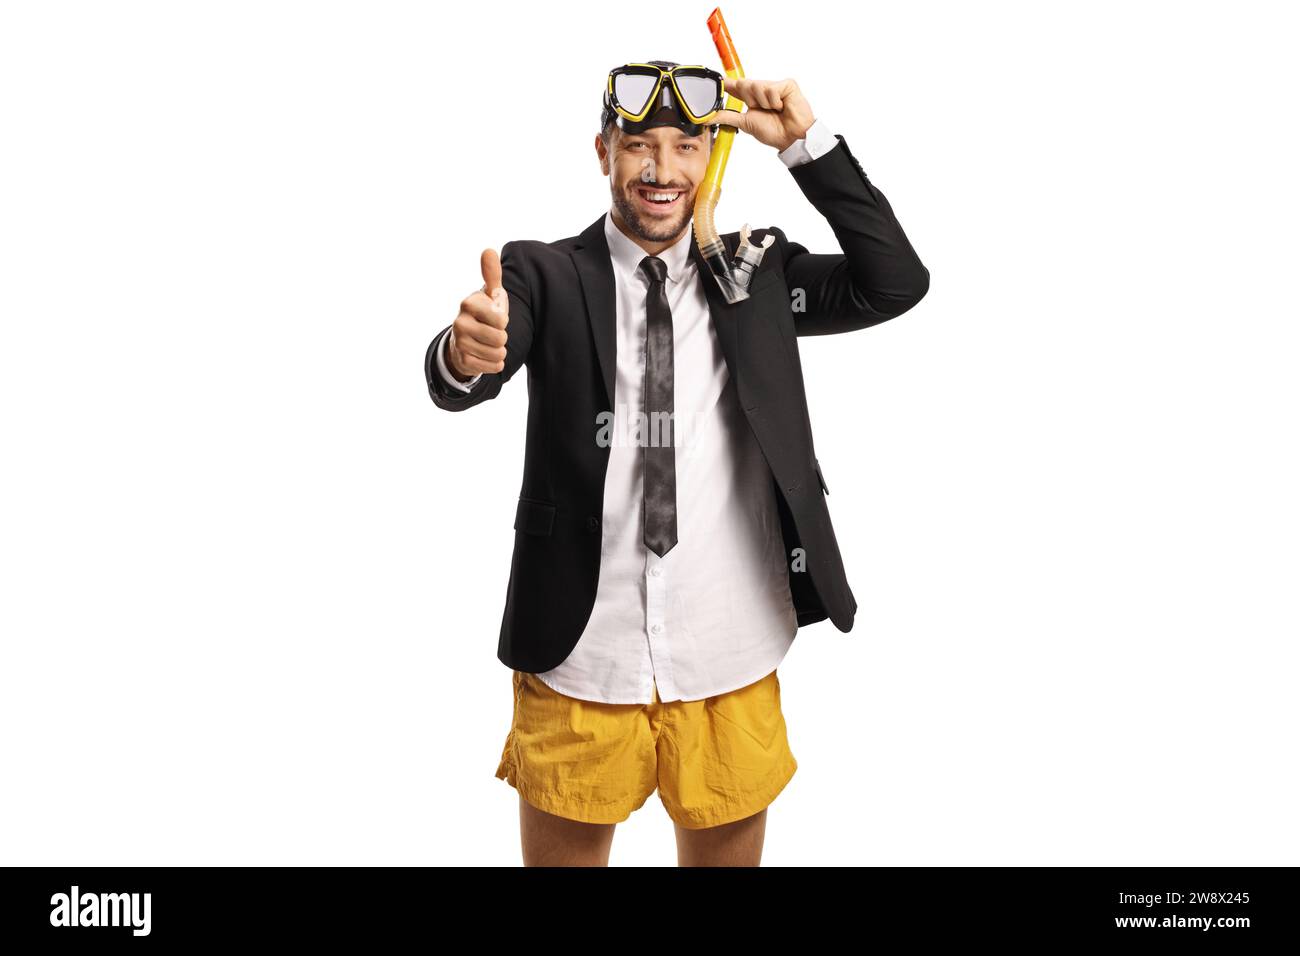 Businessman wearing yellow swimming shorts and a diving mask and gesturing thumbs up isolated on white background Stock Photo